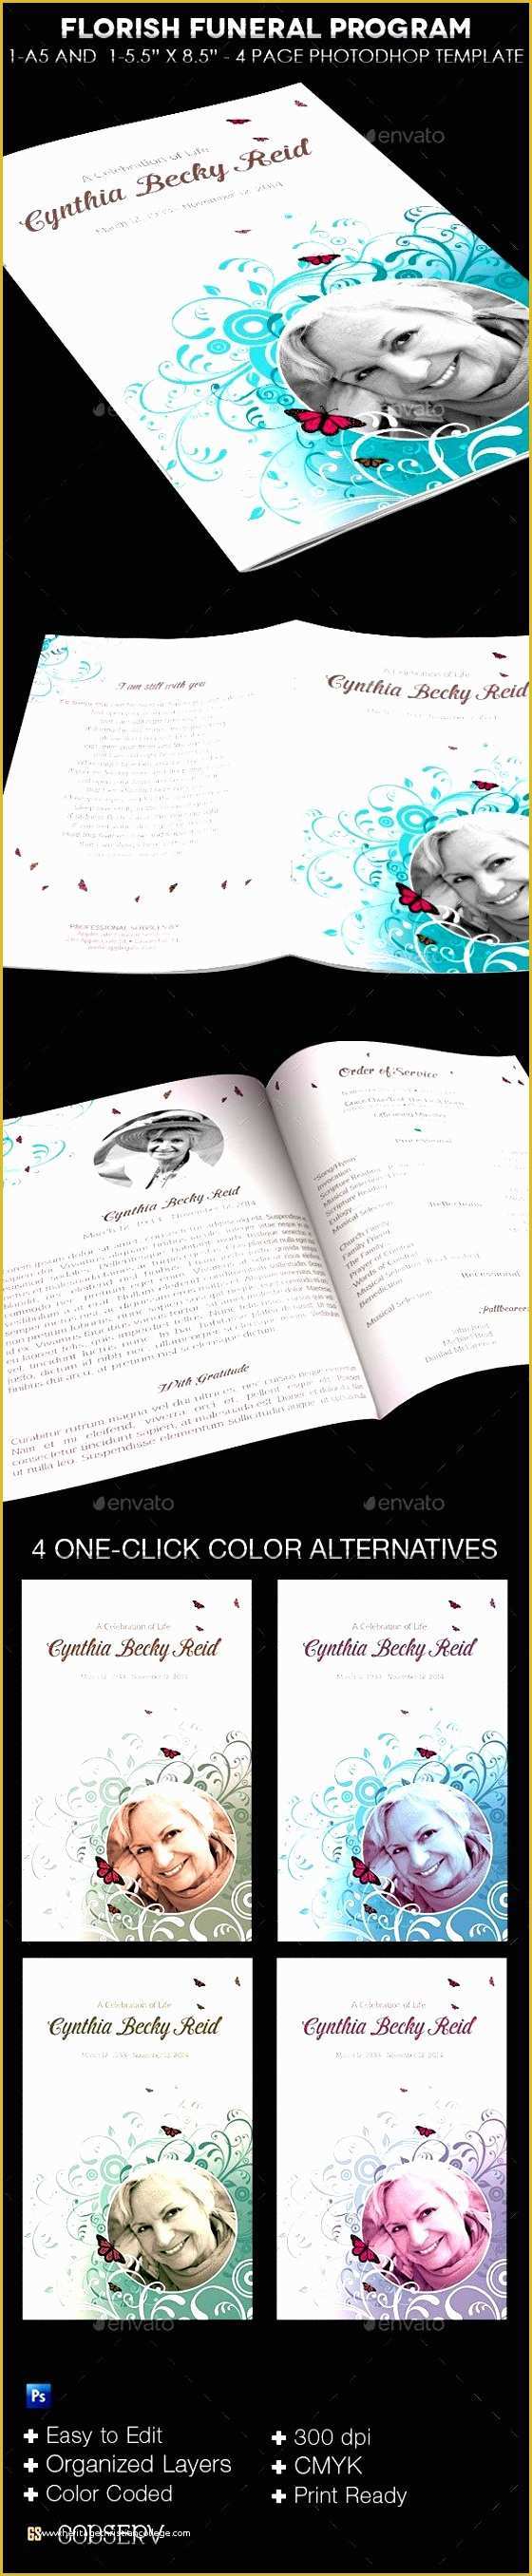 Free Obituary Template Photoshop Of 5 Easy to Edit Funeral Program Template Sampletemplatess